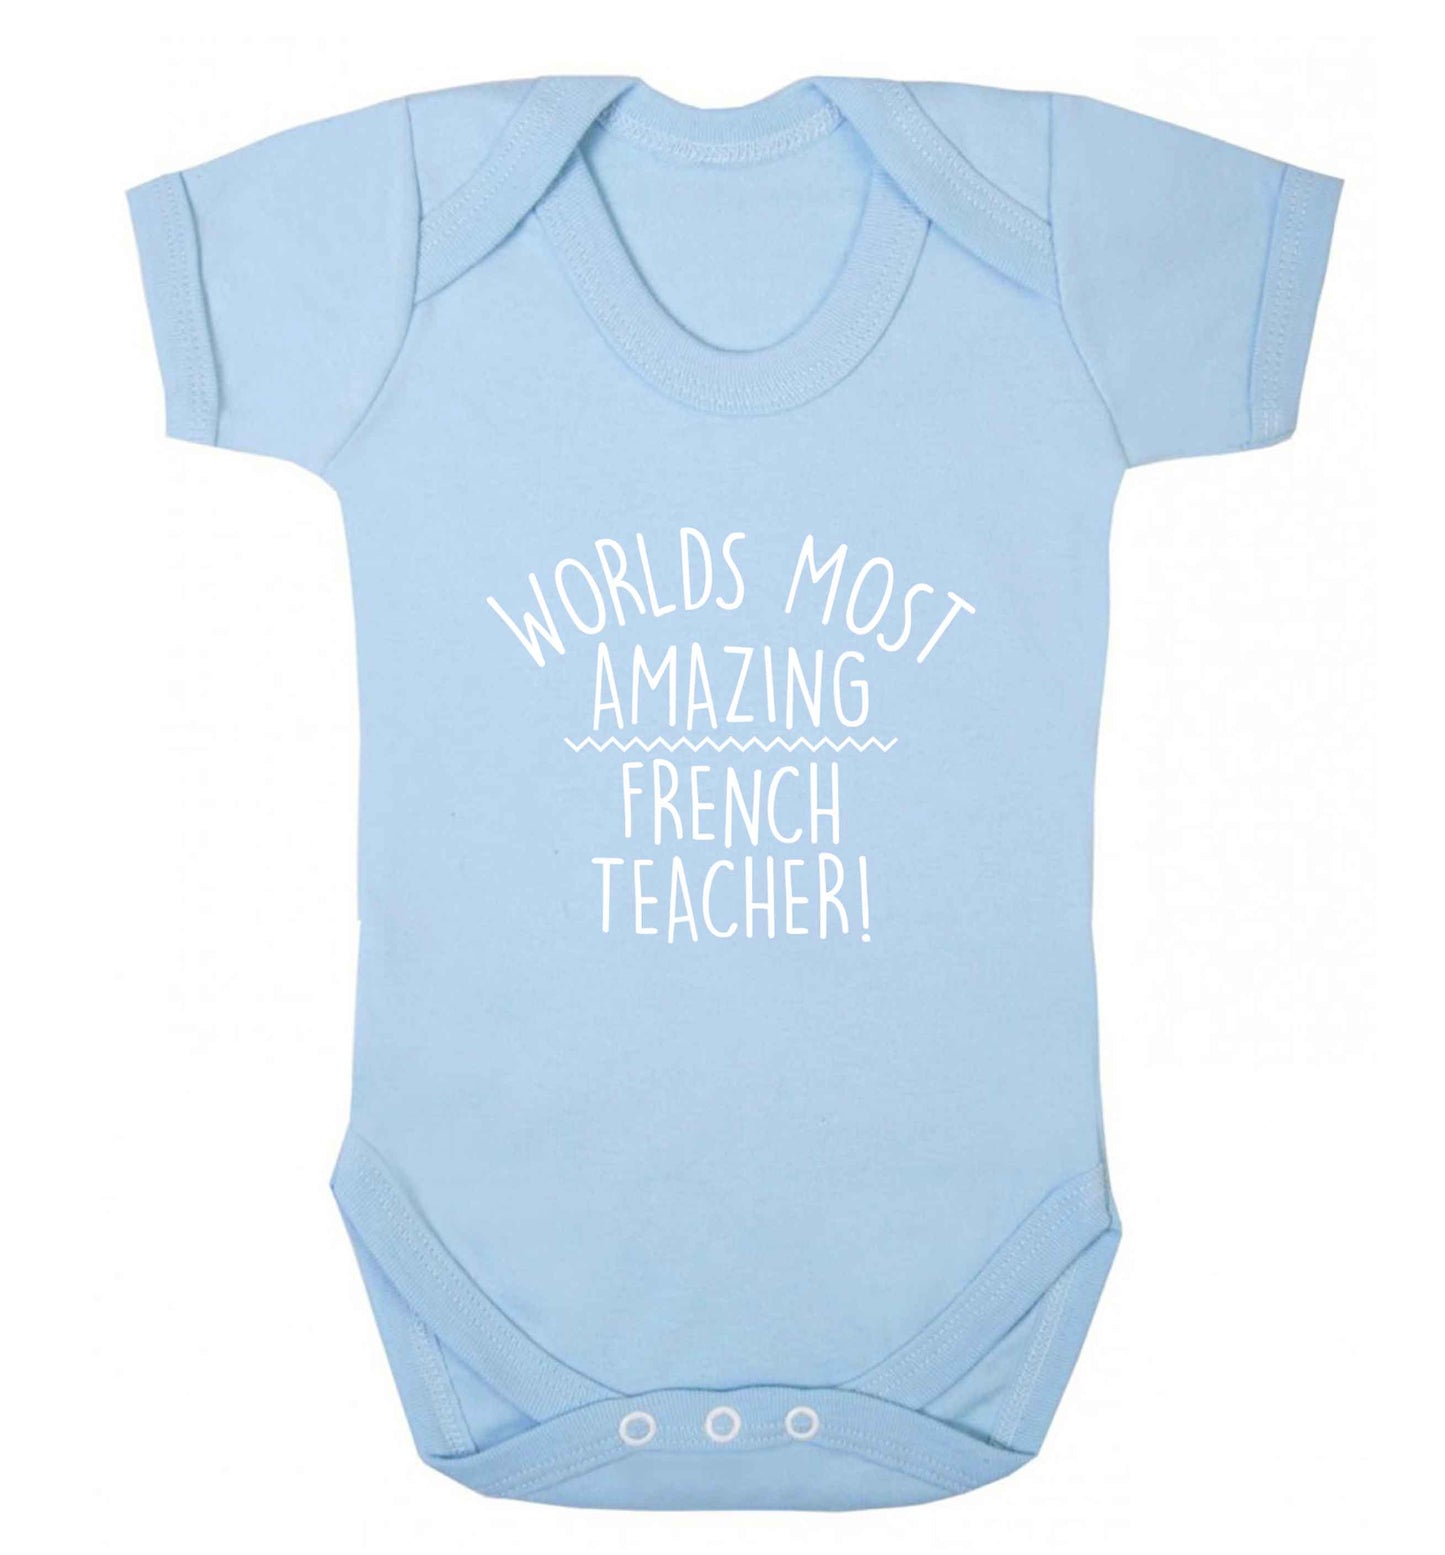 Worlds most amazing French teacher baby vest pale blue 18-24 months